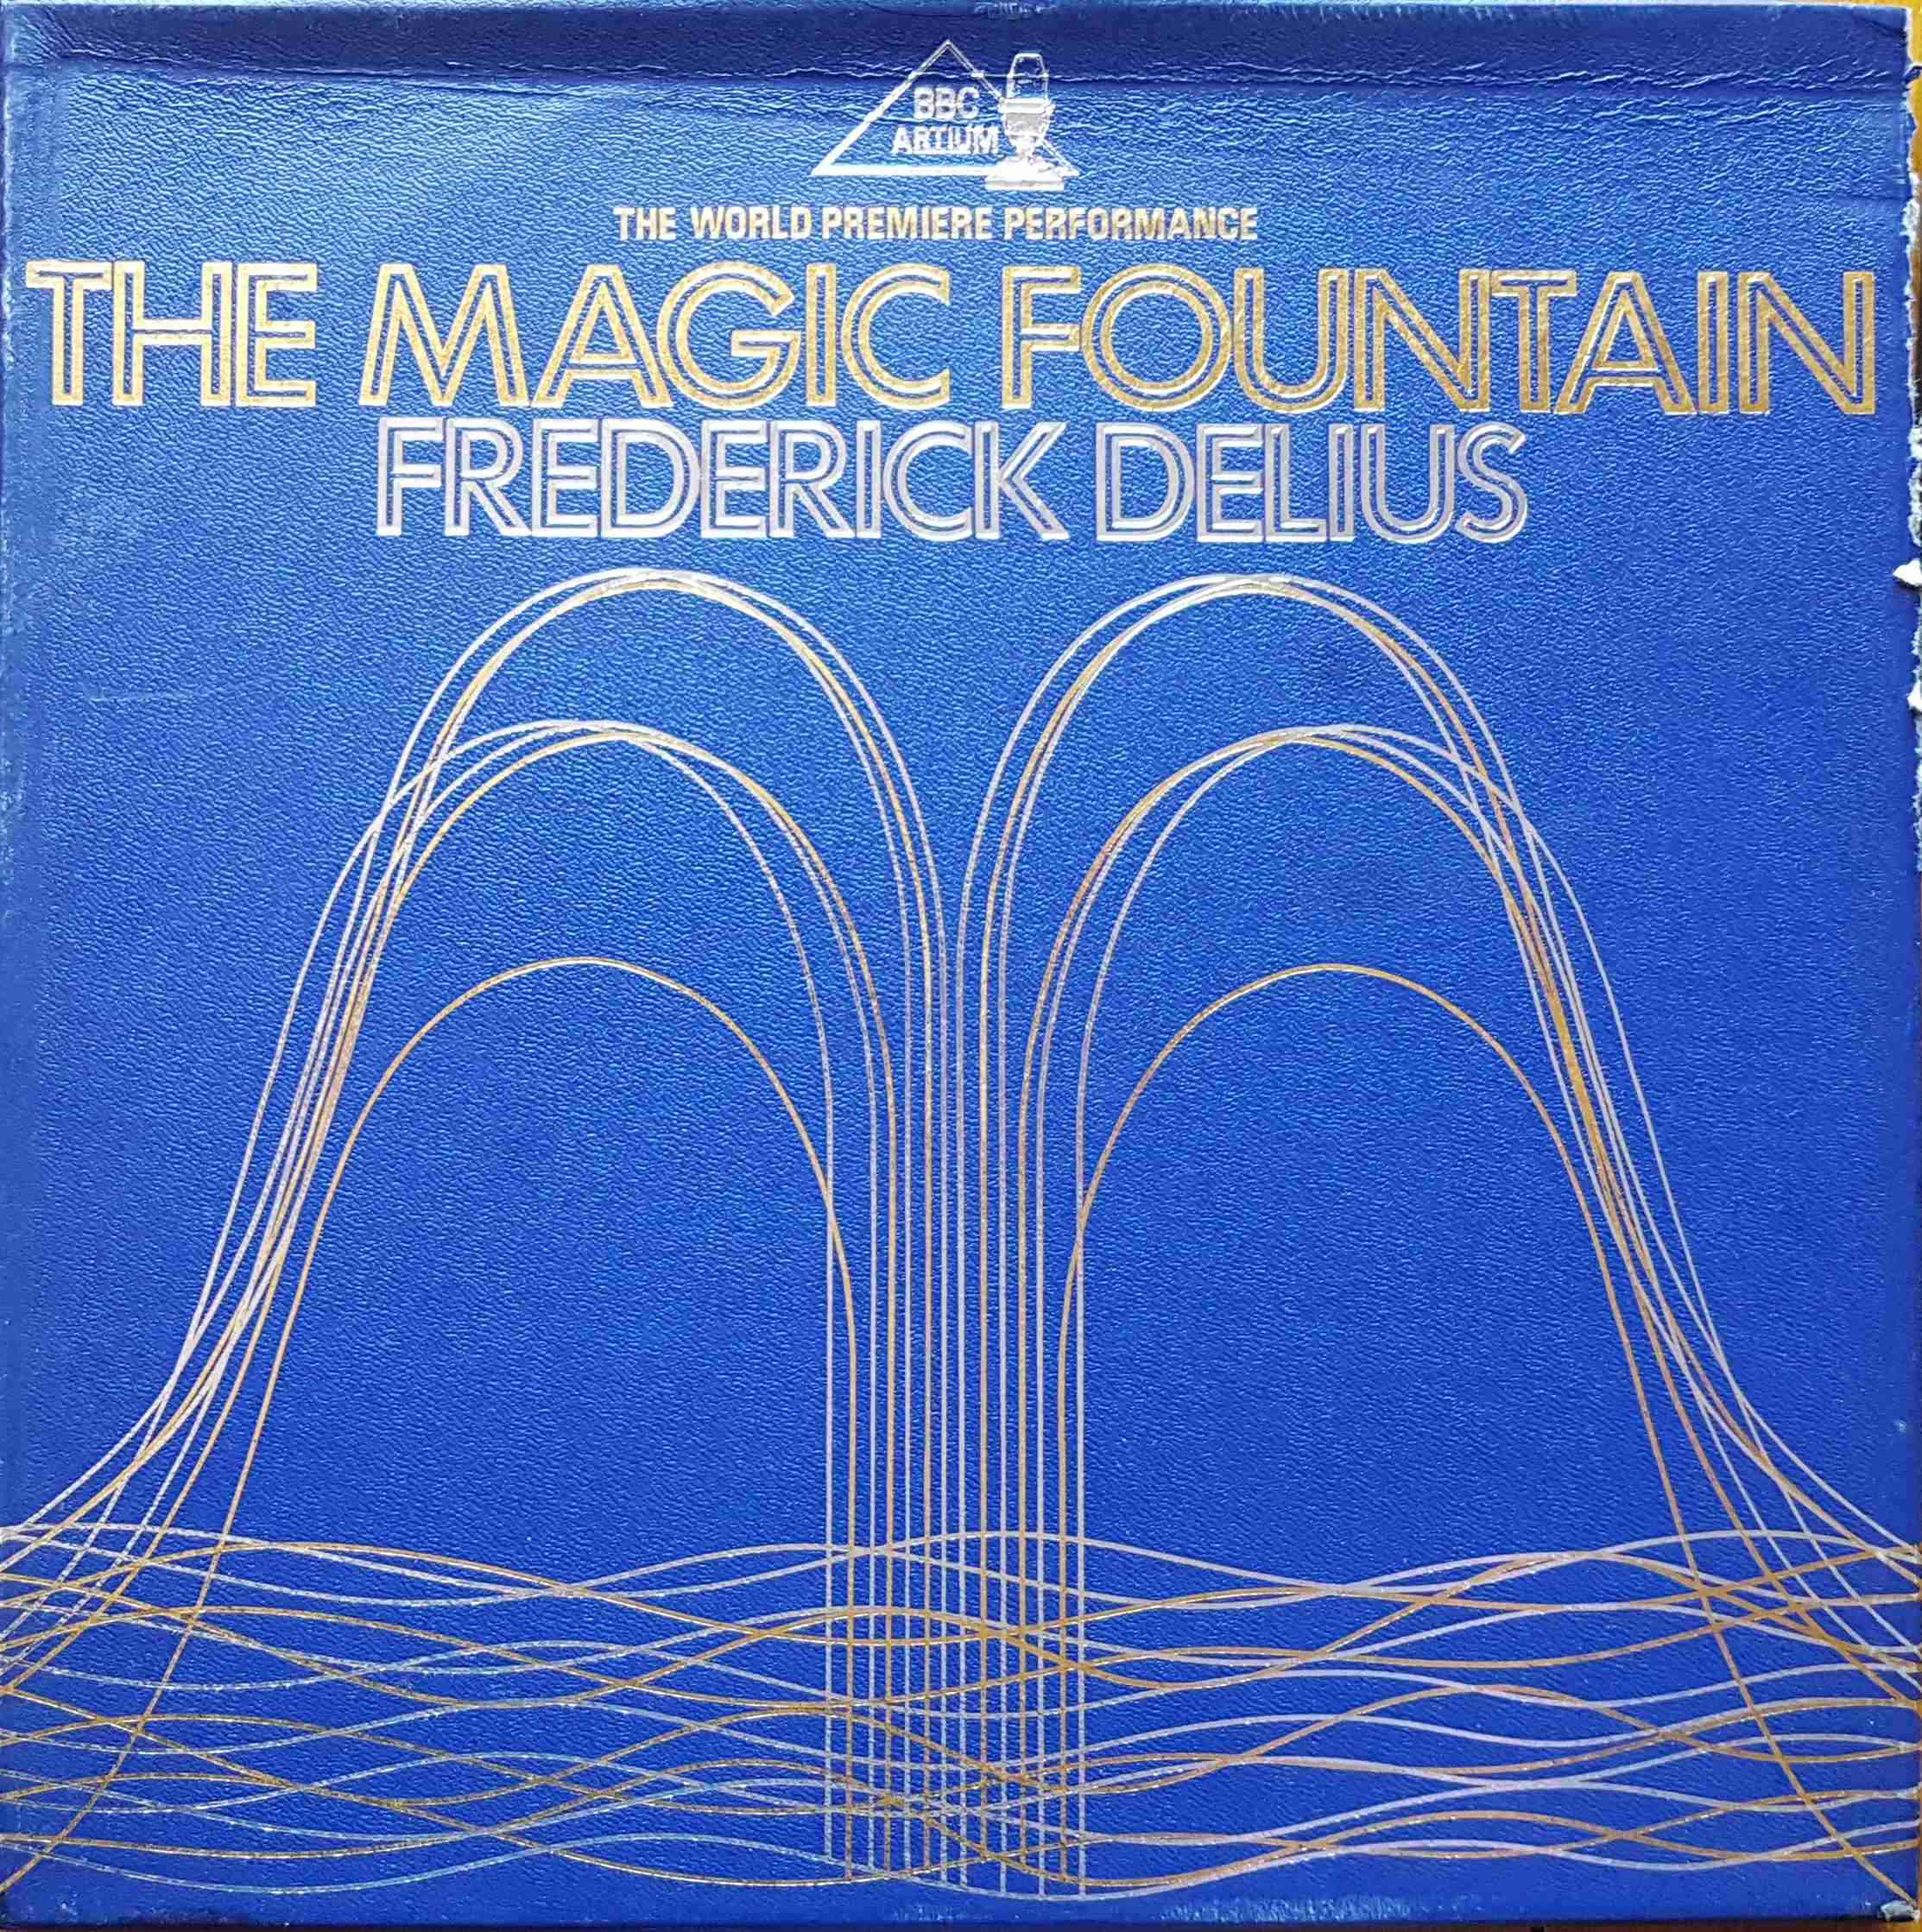 Picture of The magic fountain by artist Frederick Delius from the BBC albums - Records and Tapes library